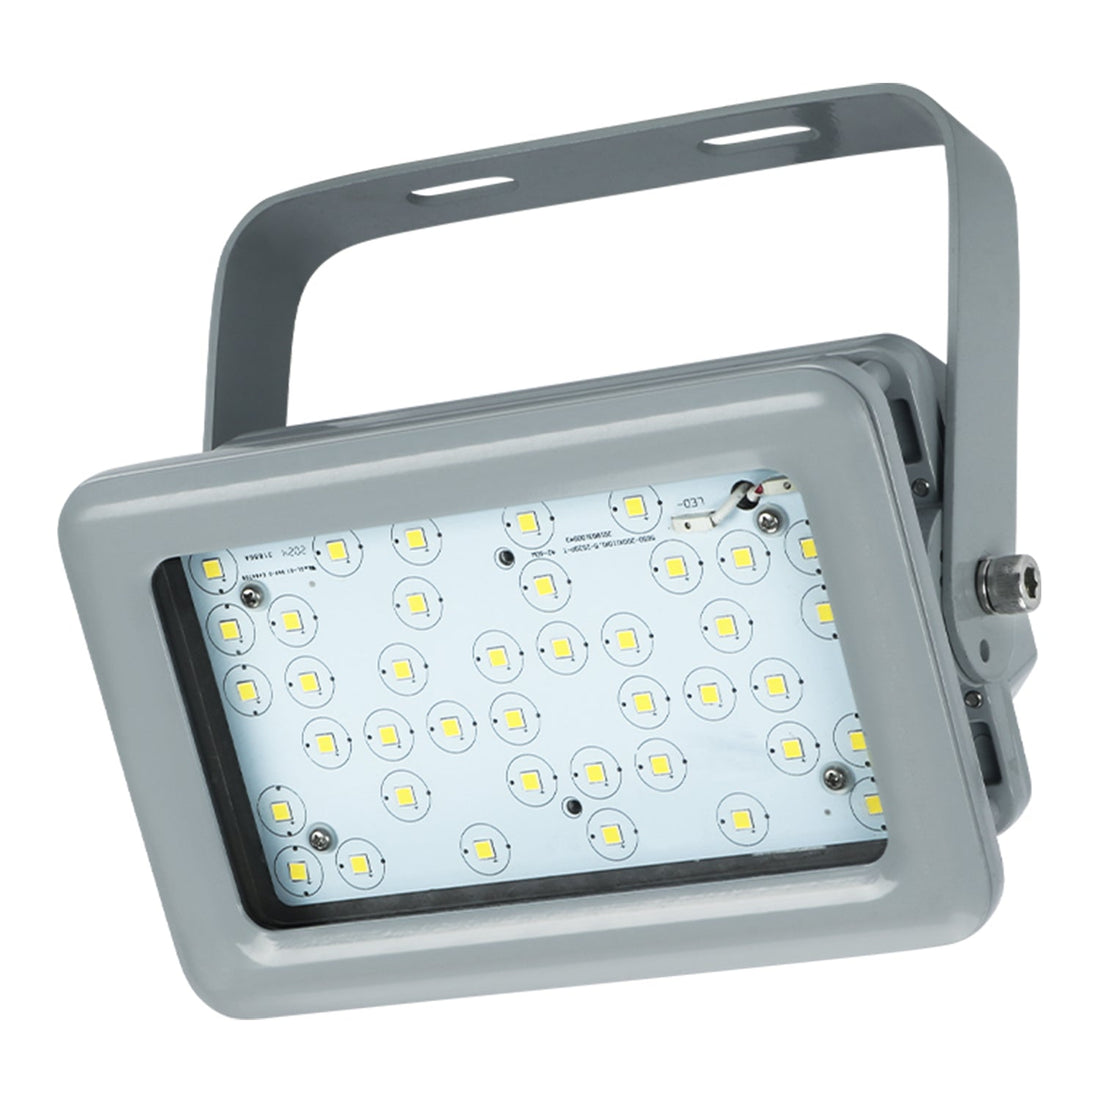 LED Explosion-Proof Flood Light - 400W - 5000K, 56000Lumens for Hazardous Locations - Dimmable, IP66 Rated, High-Intensity and Flexible